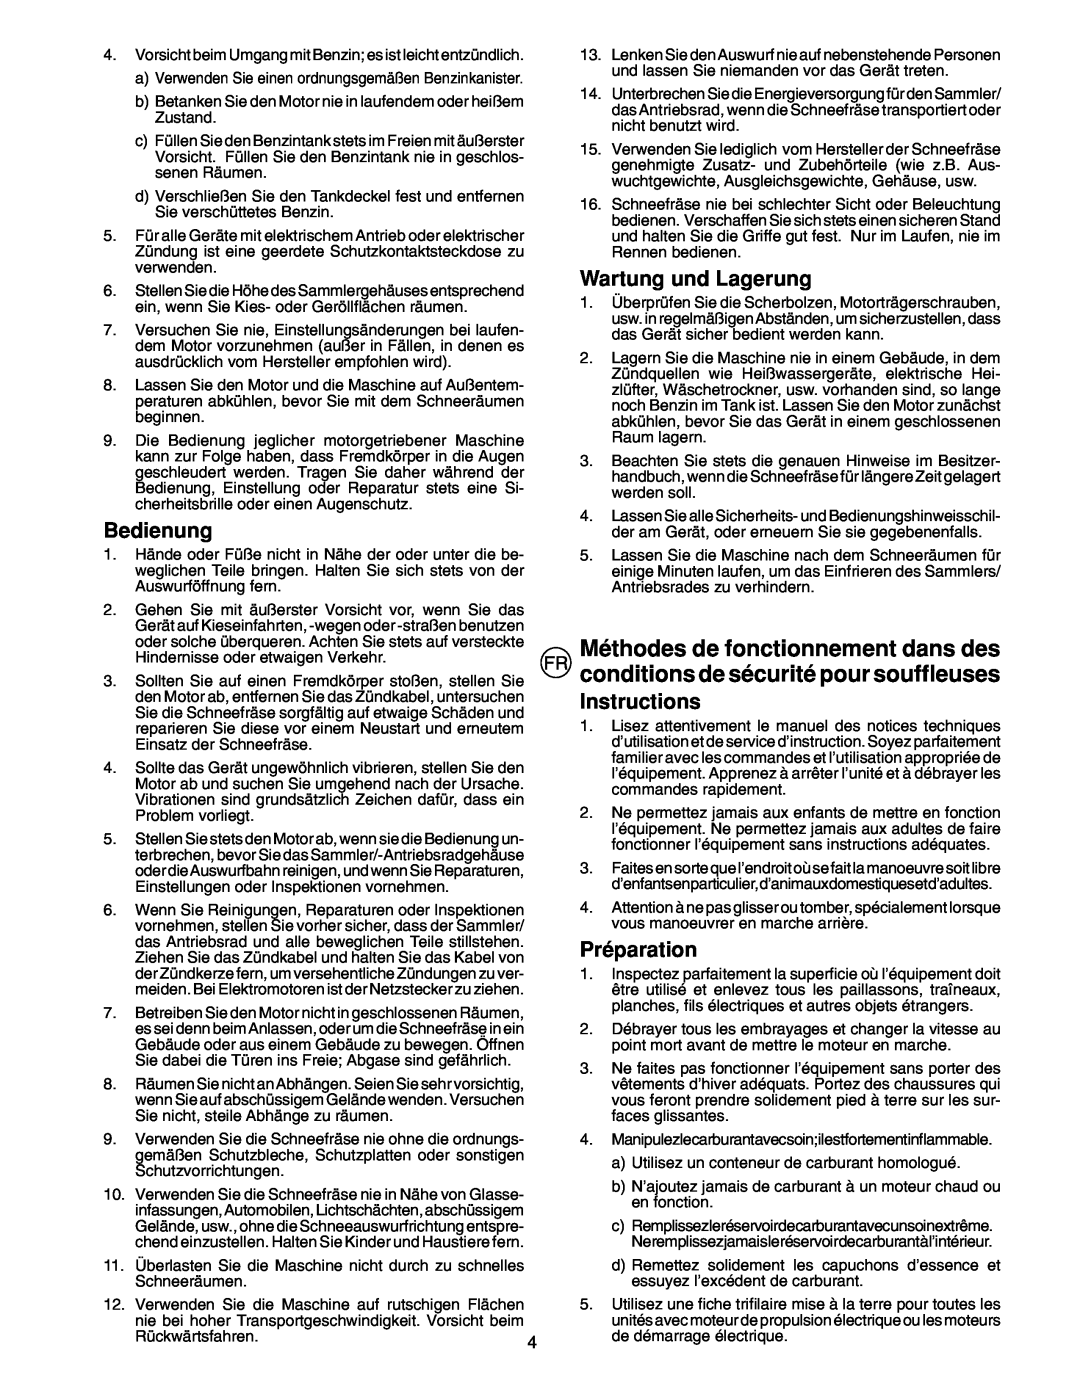 McCulloch PM85, PM55, PM105 instruction manual Bedienung, Wartung und Lagerung, Instructions, Préparation 